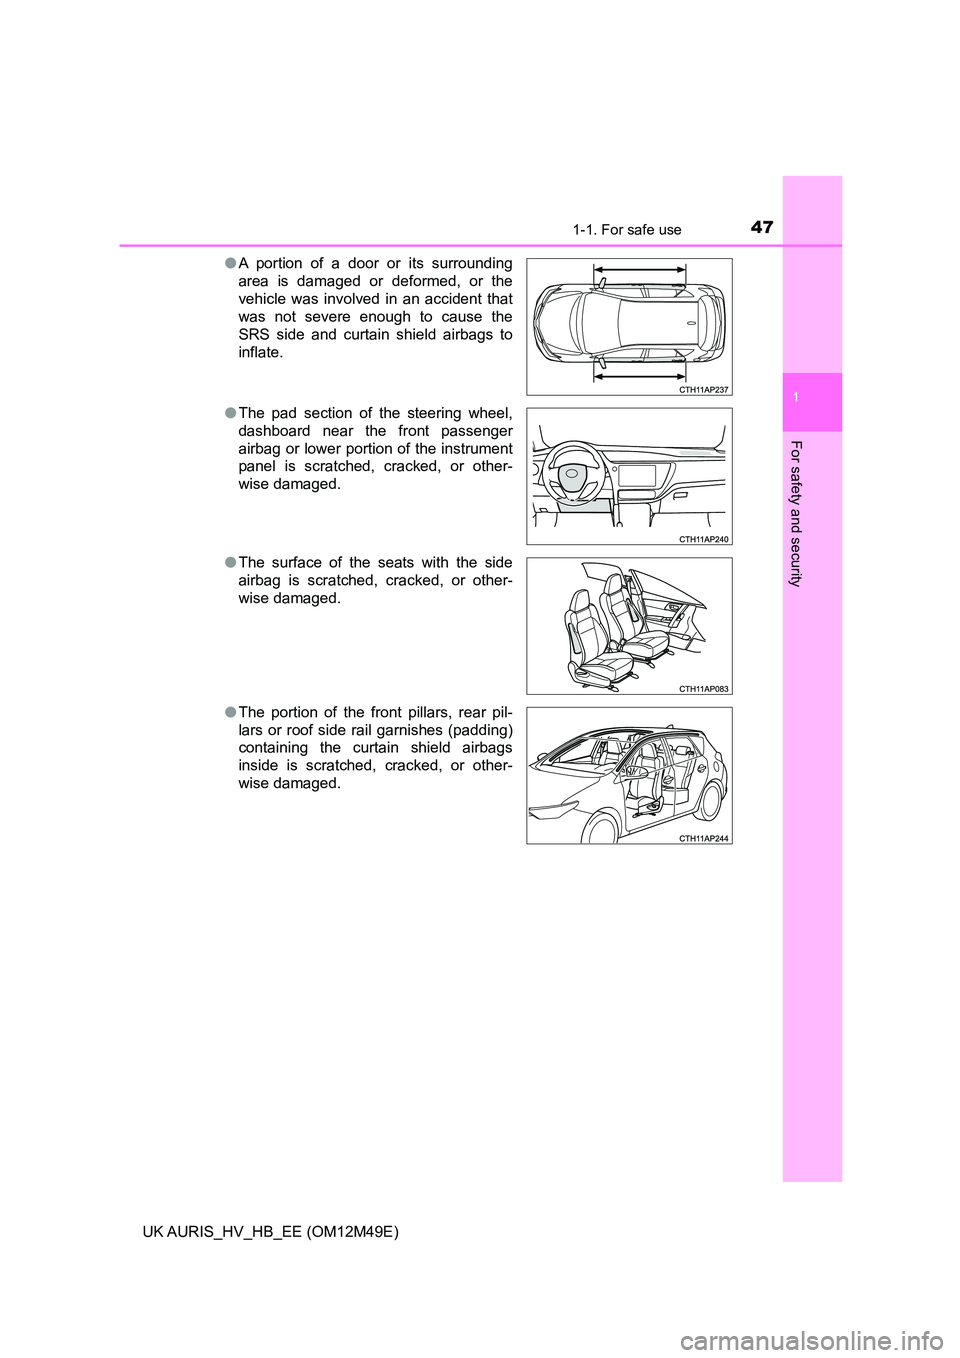 TOYOTA AURIS 2018  Owners Manual (in English) 471-1. For safe use
1
For safety and security
UK AURIS_HV_HB_EE (OM12M49E) 
● A portion of a door or its surrounding 
area is damaged or deformed, or the 
vehicle was involved in an accident that
wa